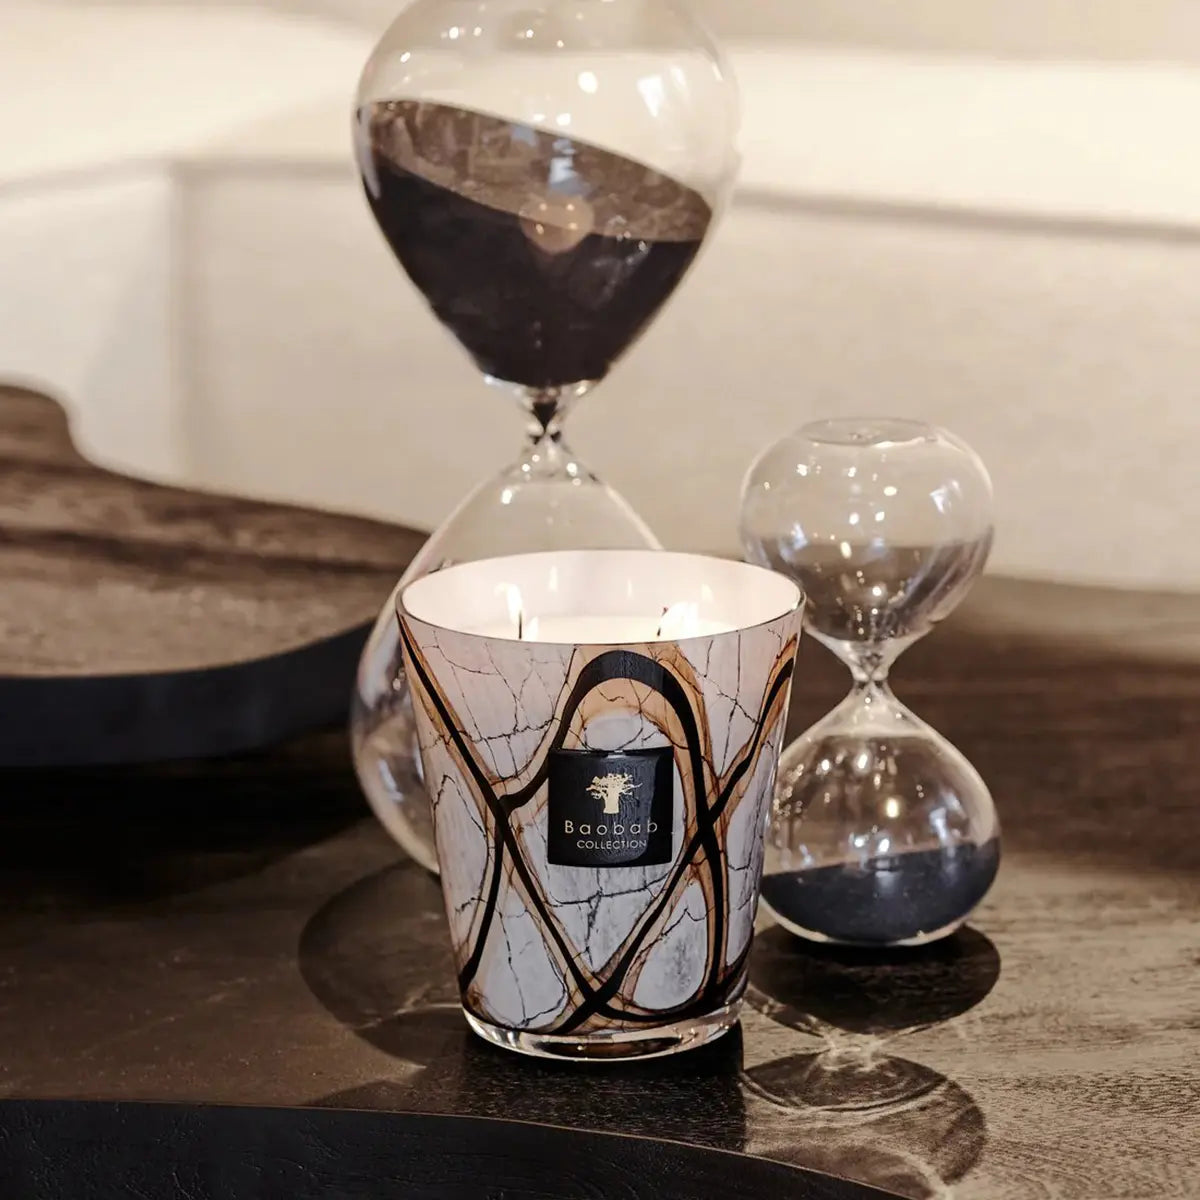 Baobab Collection Max 16 Stones Marble Candle set on a coffee table in a room with hourglasses